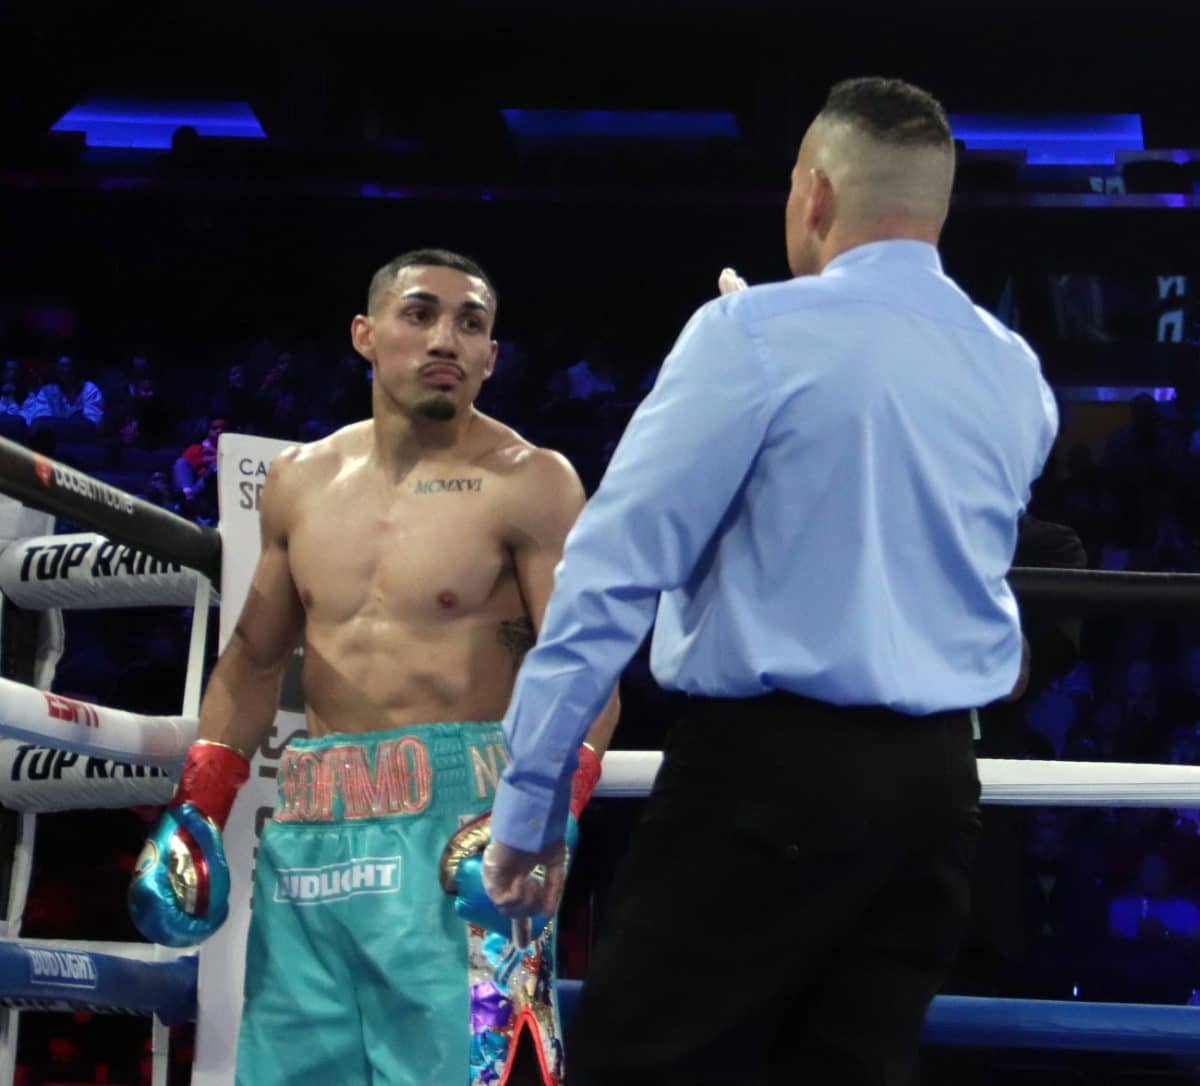 Image: Teofimo Lopez doesn't need a new trainer says Fernando Vargas